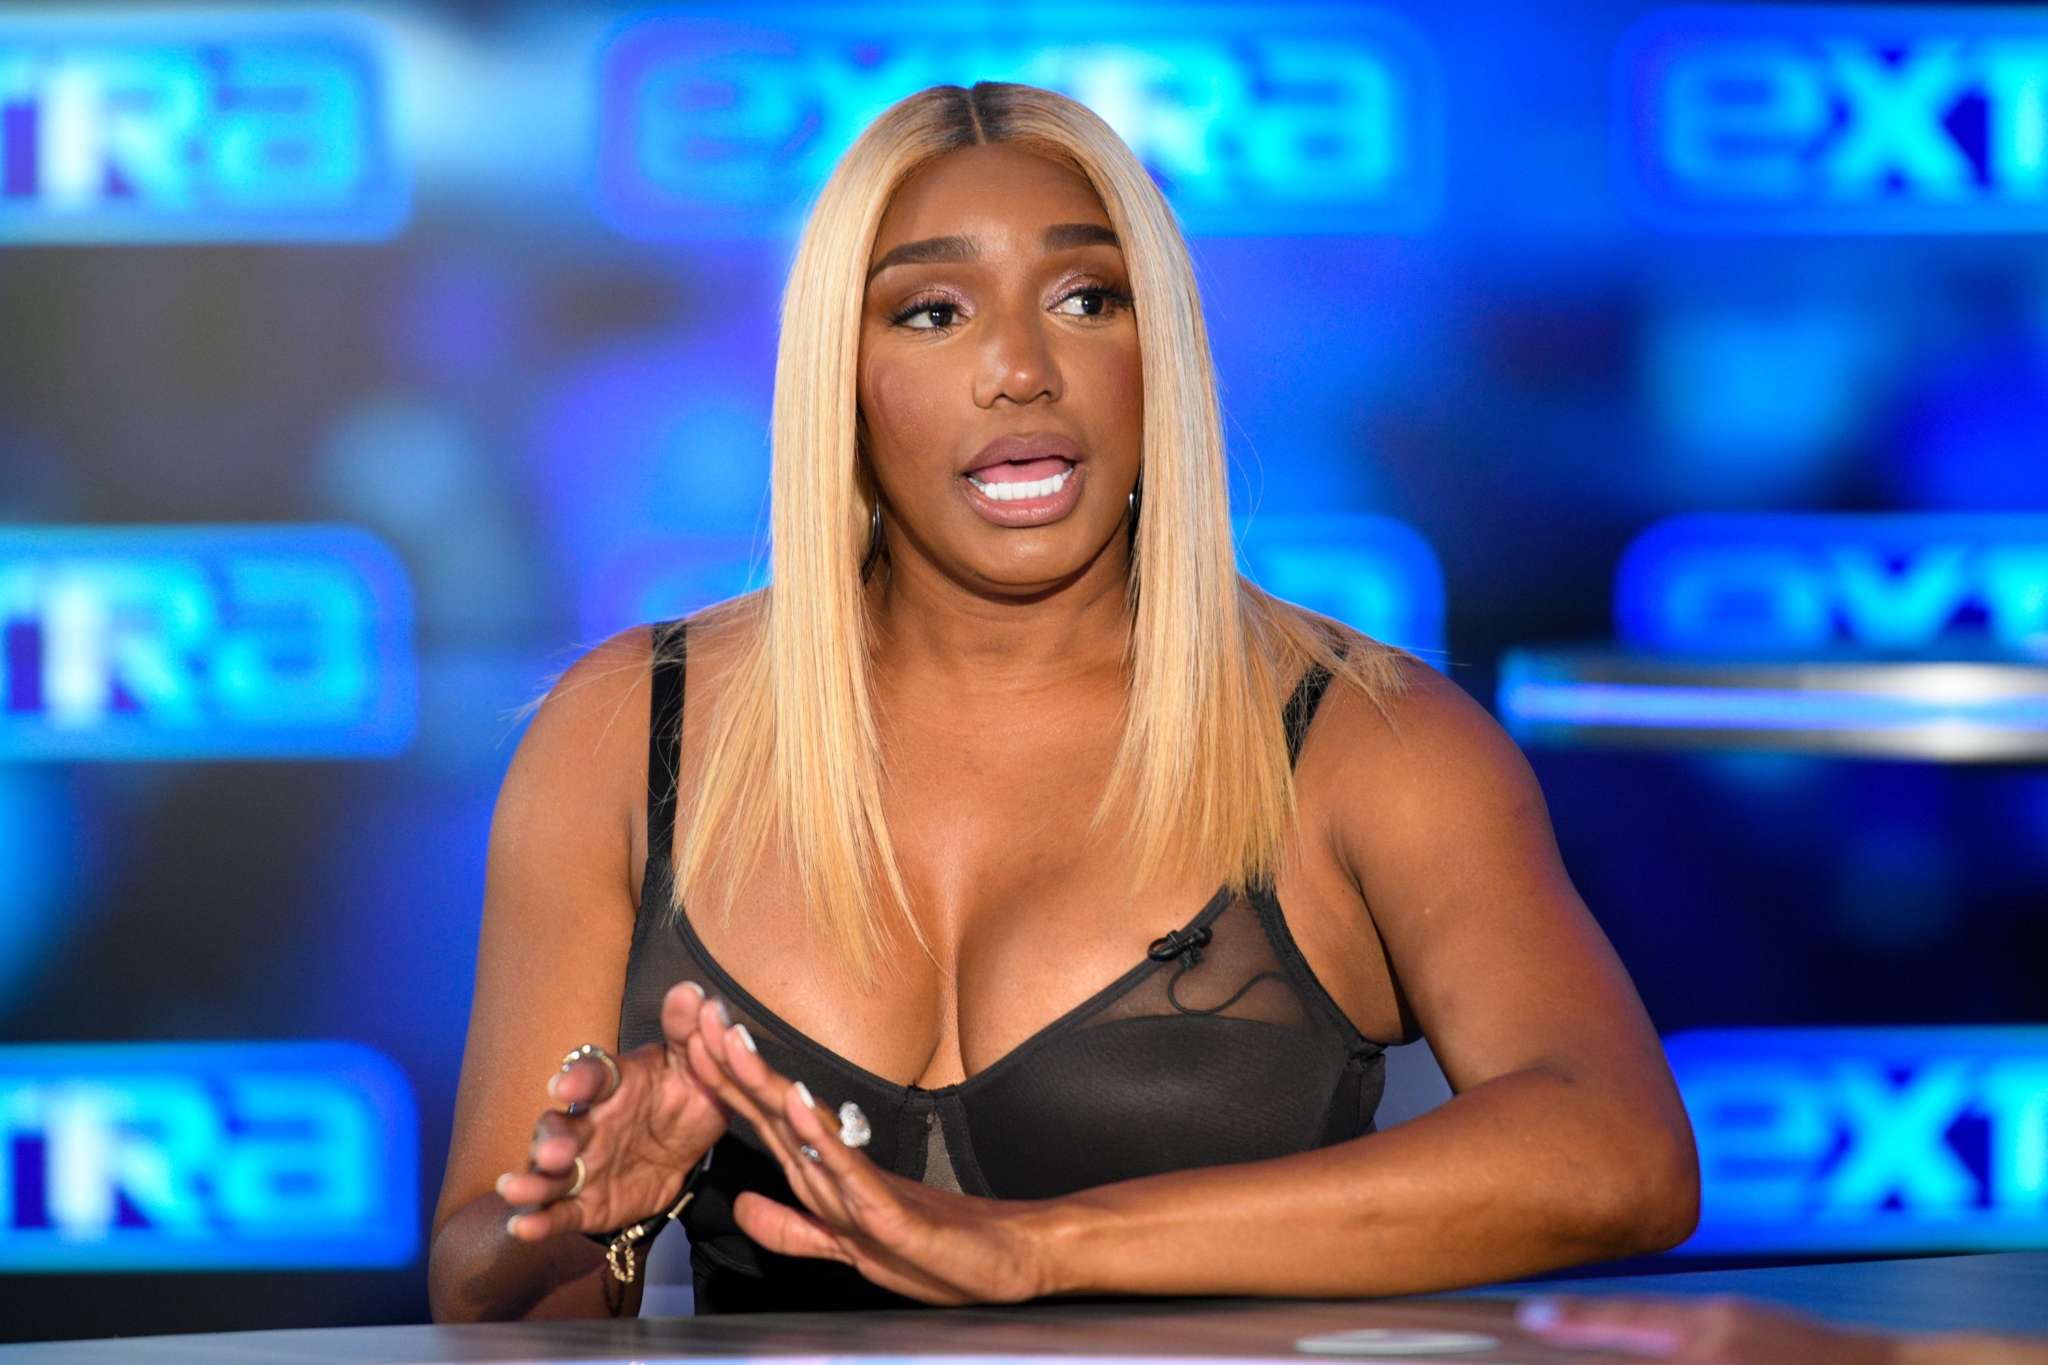 NeNe Leakes Praises Lizzo - Check Out The Video She Shared